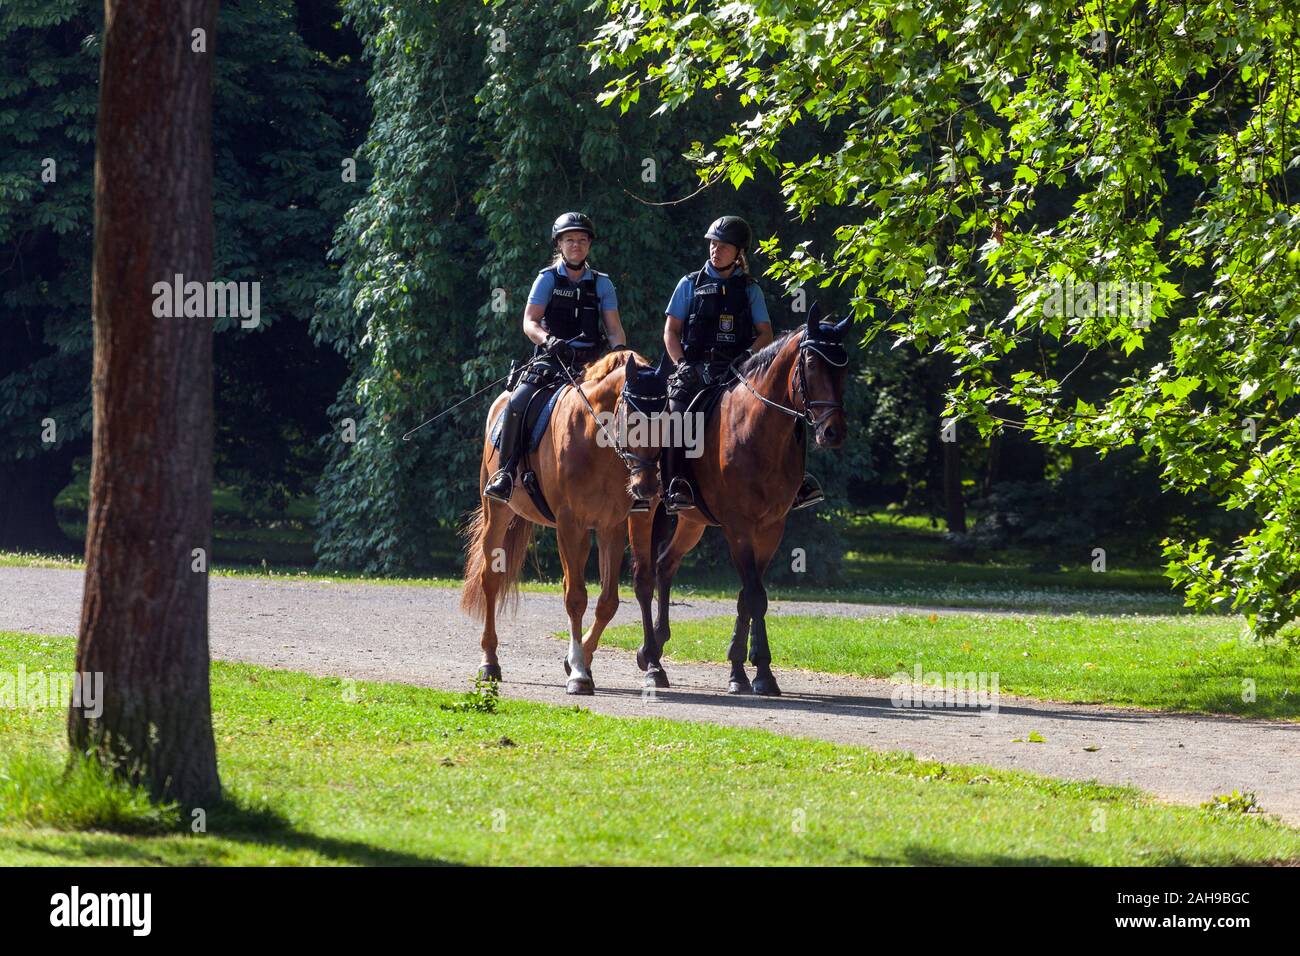 German woman Germany policewoman mounted police patrolling in the park Stock Photo